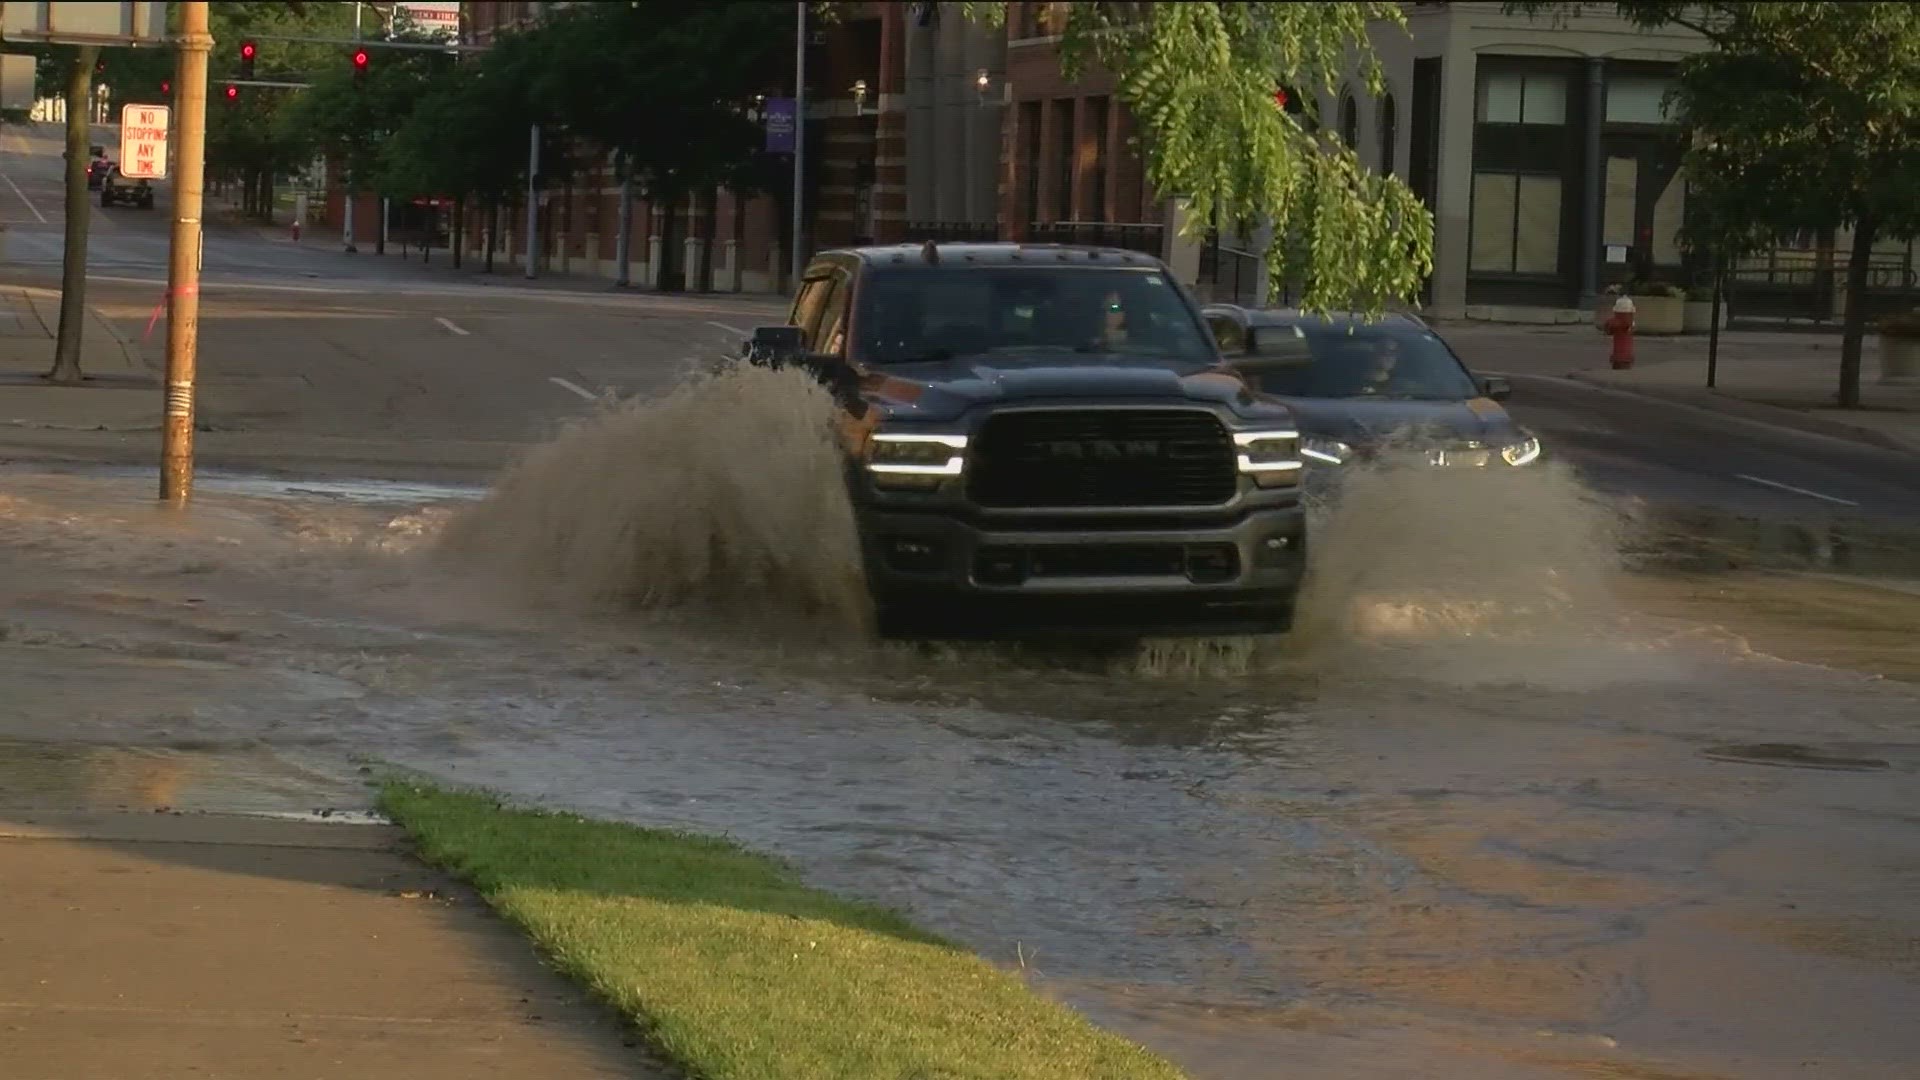 A 12-inch water main break caused significant flooding on Washington in downtown Toledo Friday morning. Crews are working at the scene.